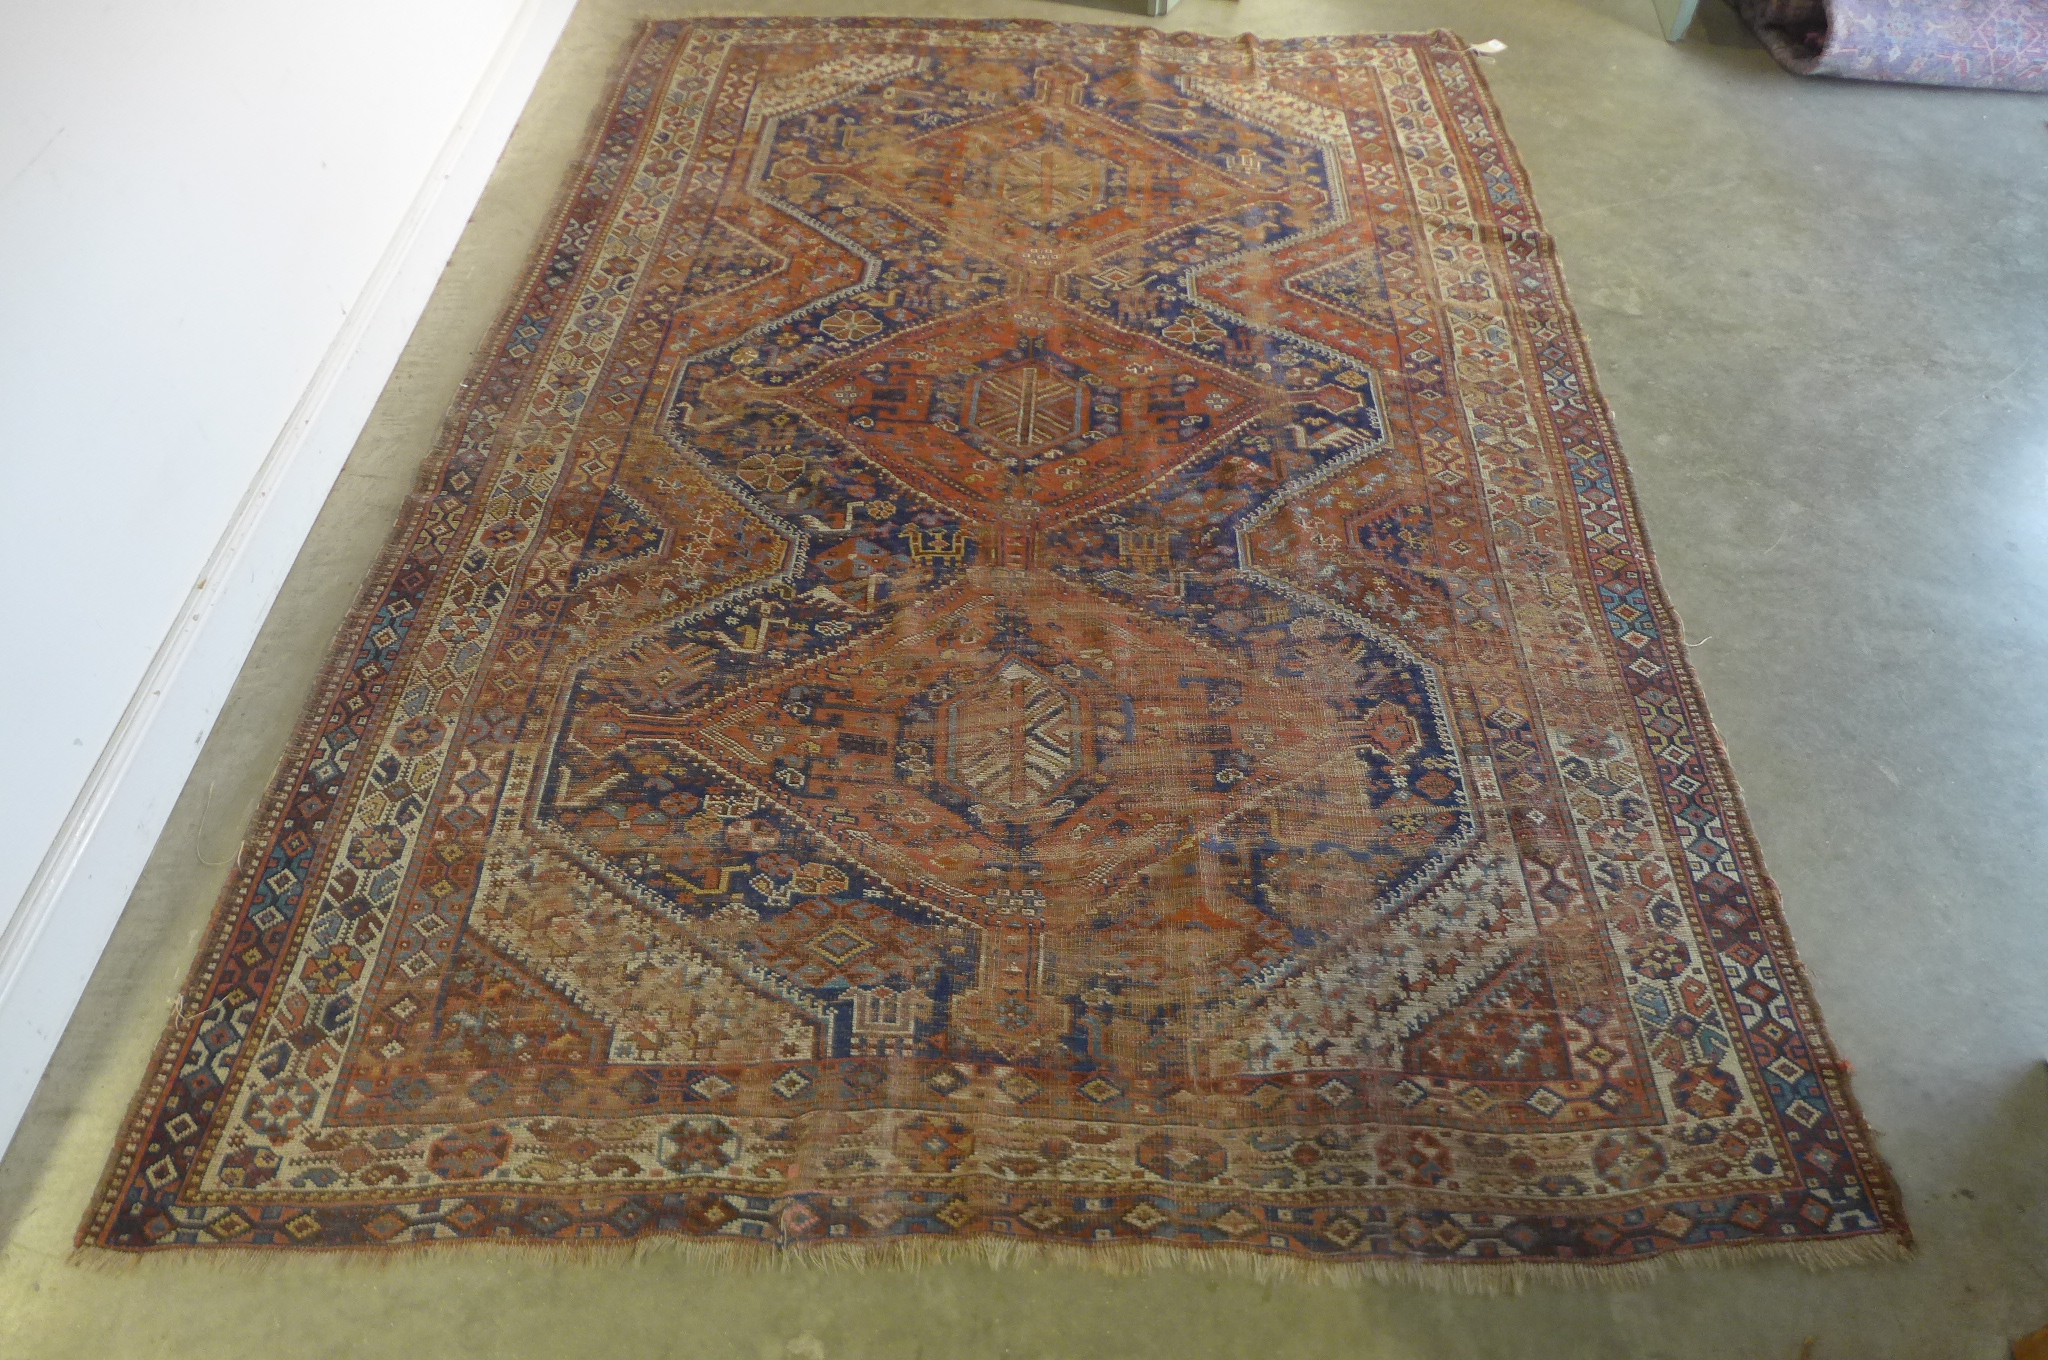 A vintage hand knotted Eastern woollen rug, 302cm x 206cm, in worn condition and some fading